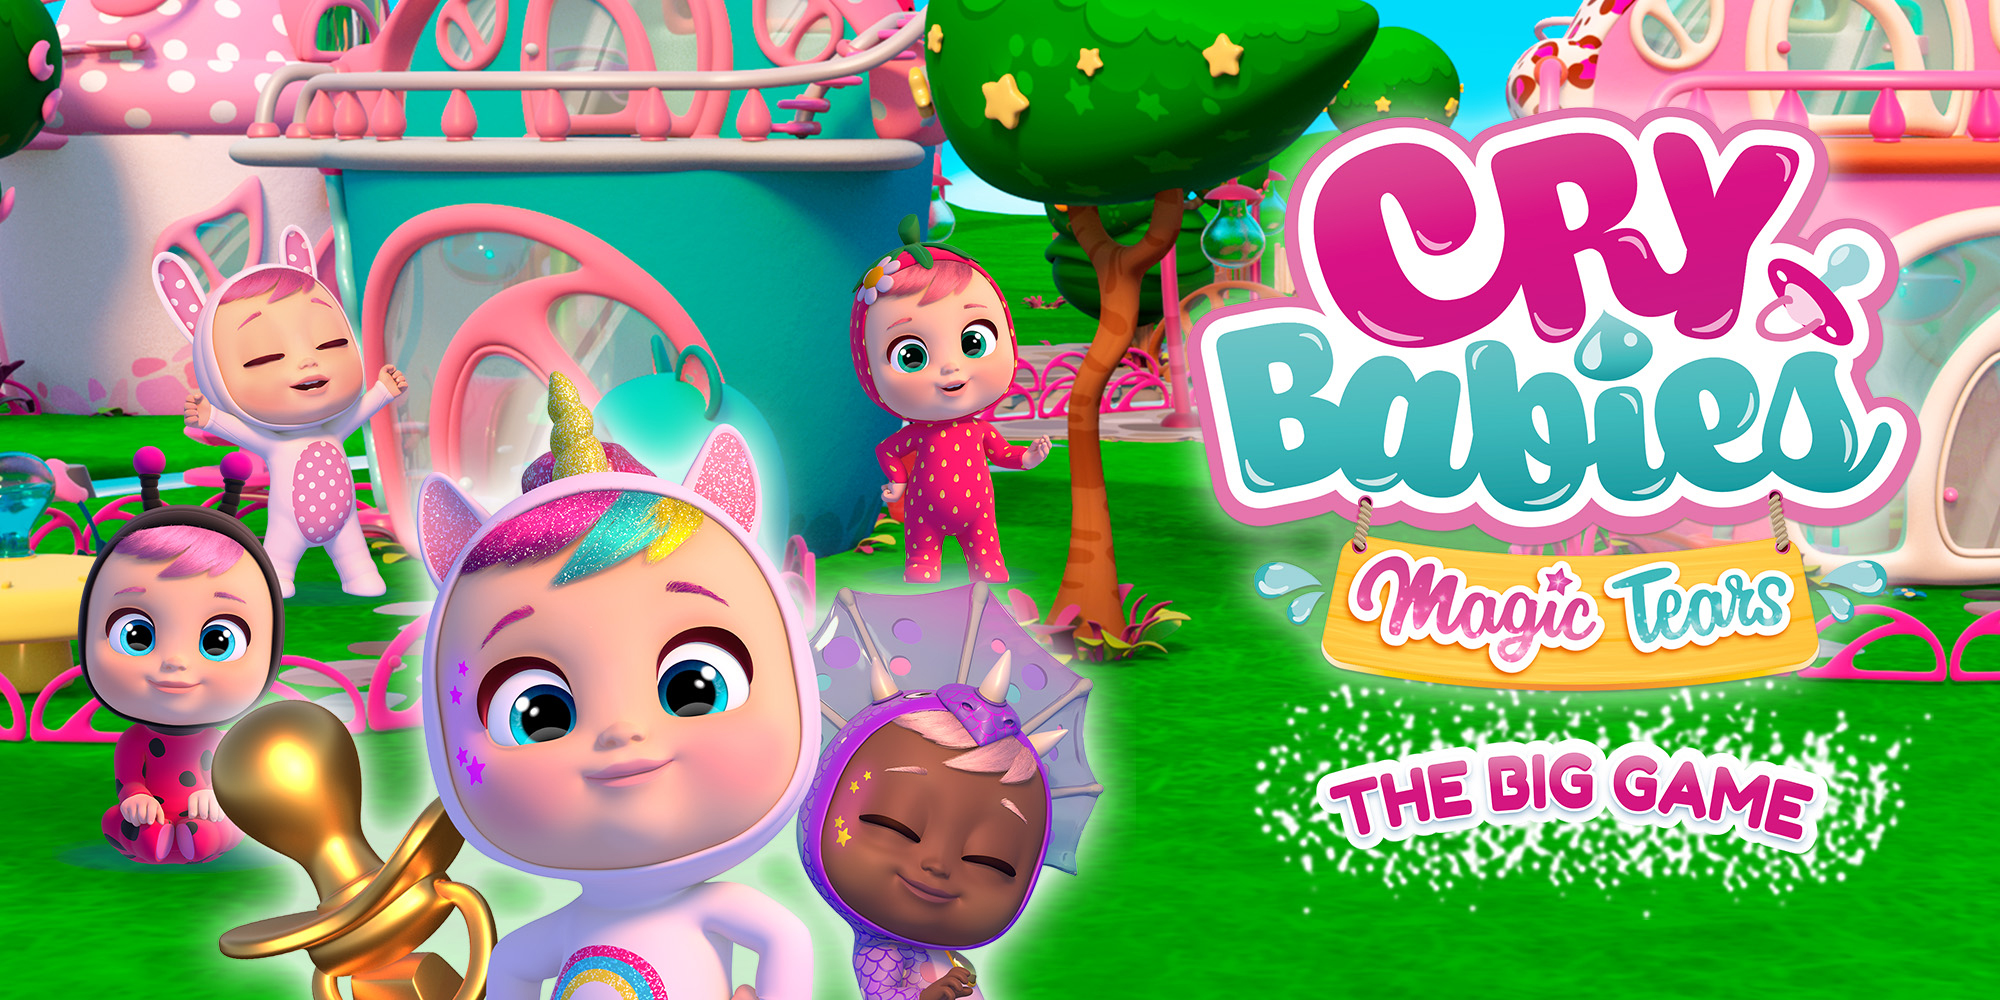 Cry Babies Magic Tears: The Big Game, Nintendo Switch games, Games